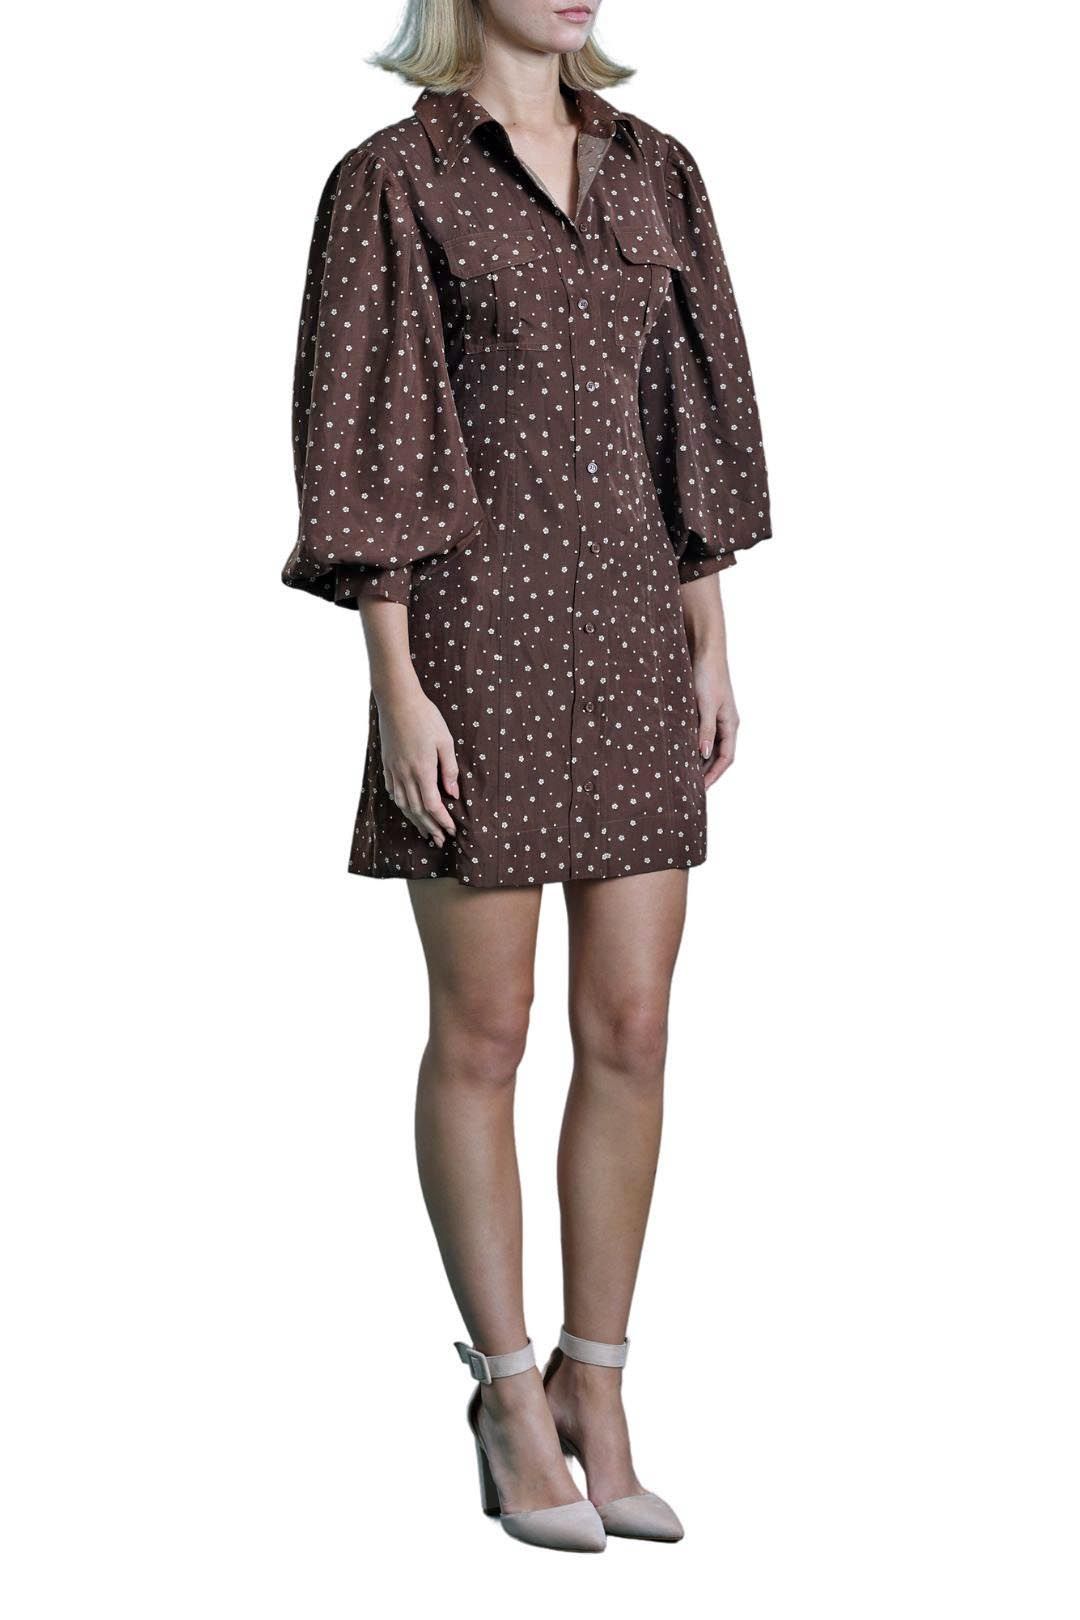 Daisy Says Brown Shirt Dress With Floral Print Balloon Sleeves